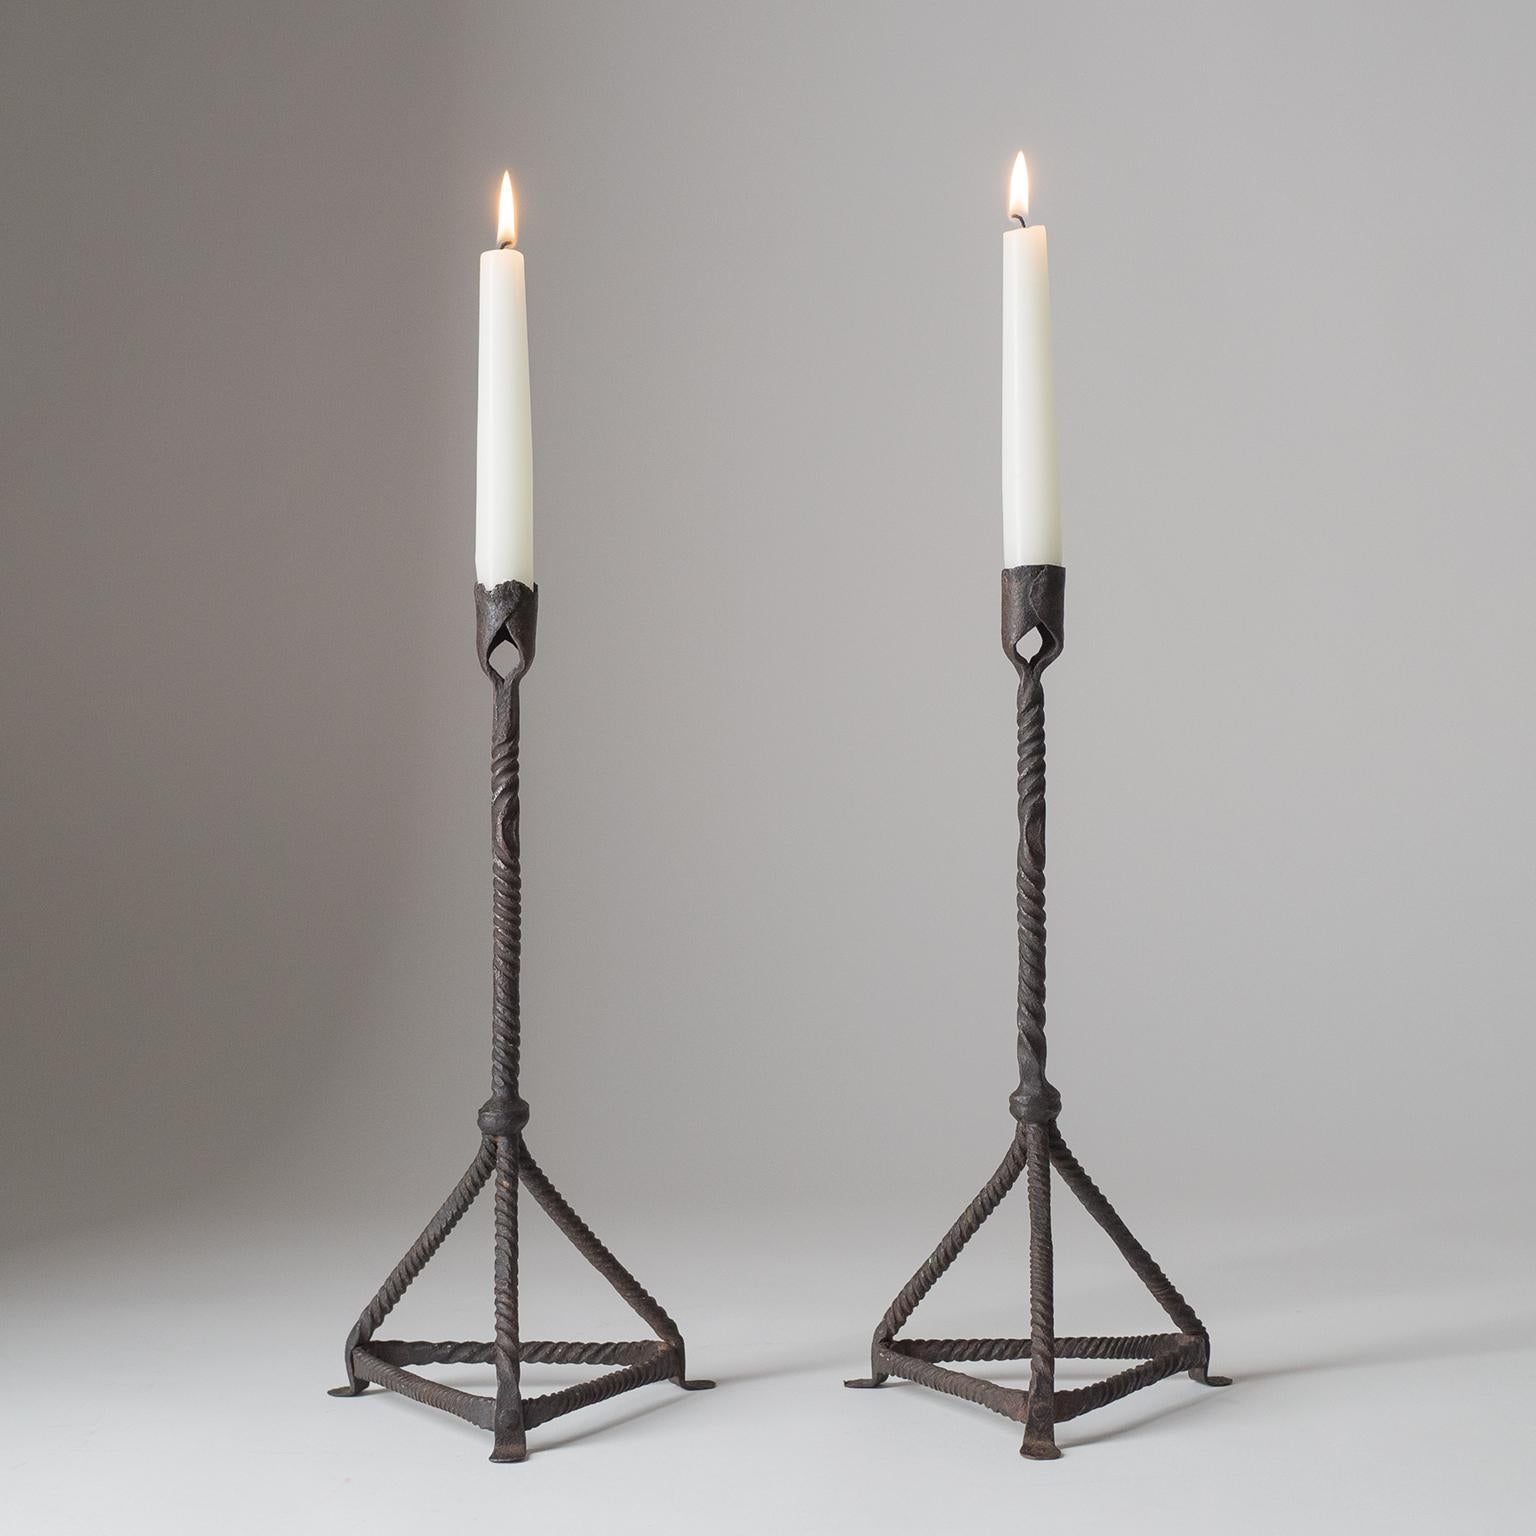 Pair of primitive French forged iron candlesticks, early 20th century.